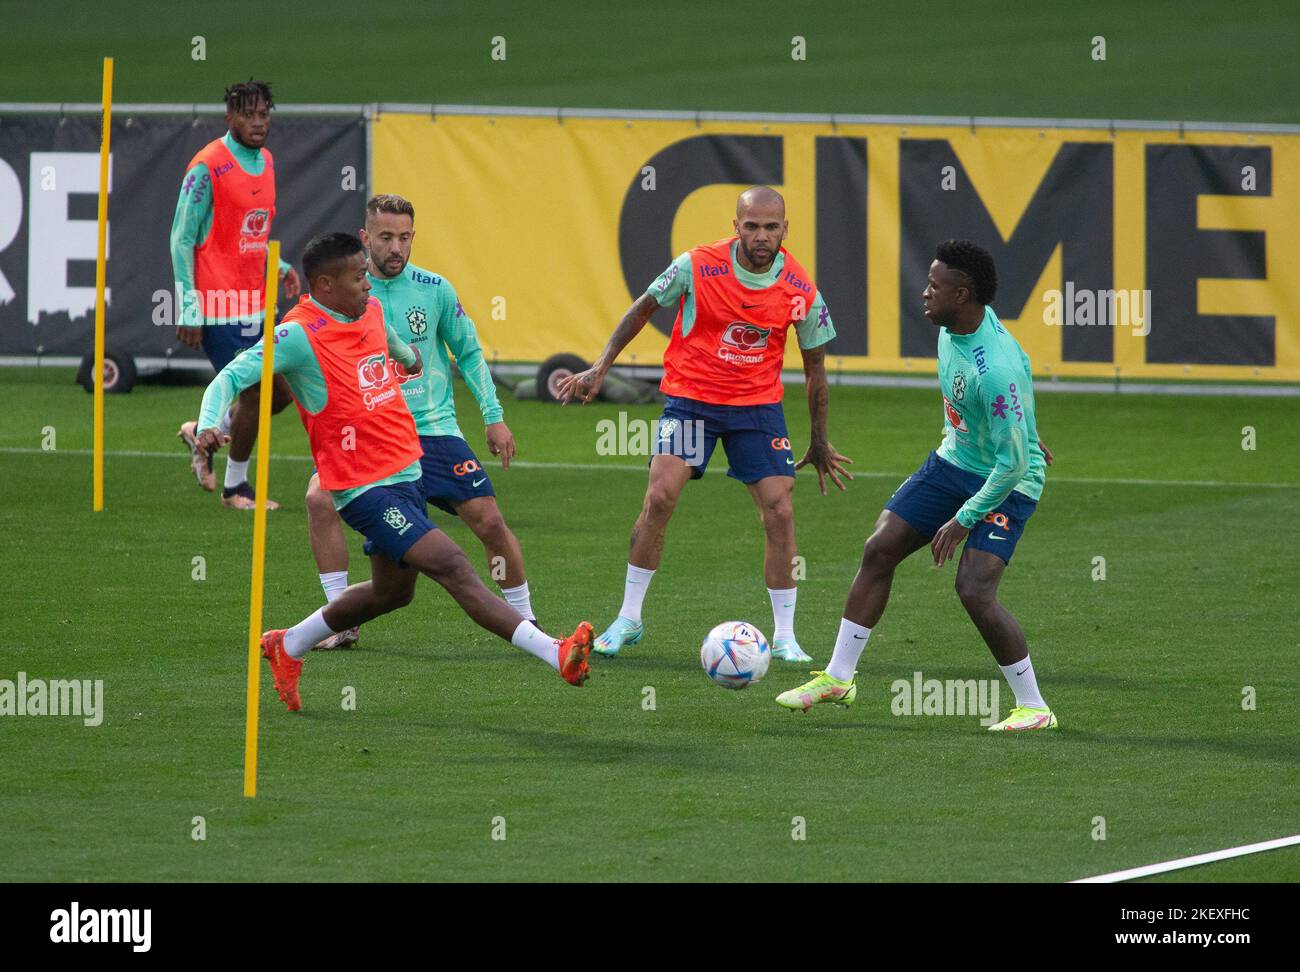 Alex Sandro of Brazil, Vinicius Jr of Brazil and Dani Alves of Brazil during the first day of trying of the Brazil National football team before the final stage of the Qatar 2022 World Cup,  at the Juventus Training Center in Turin, Italy  Photo Nderim Kaceli Stock Photo